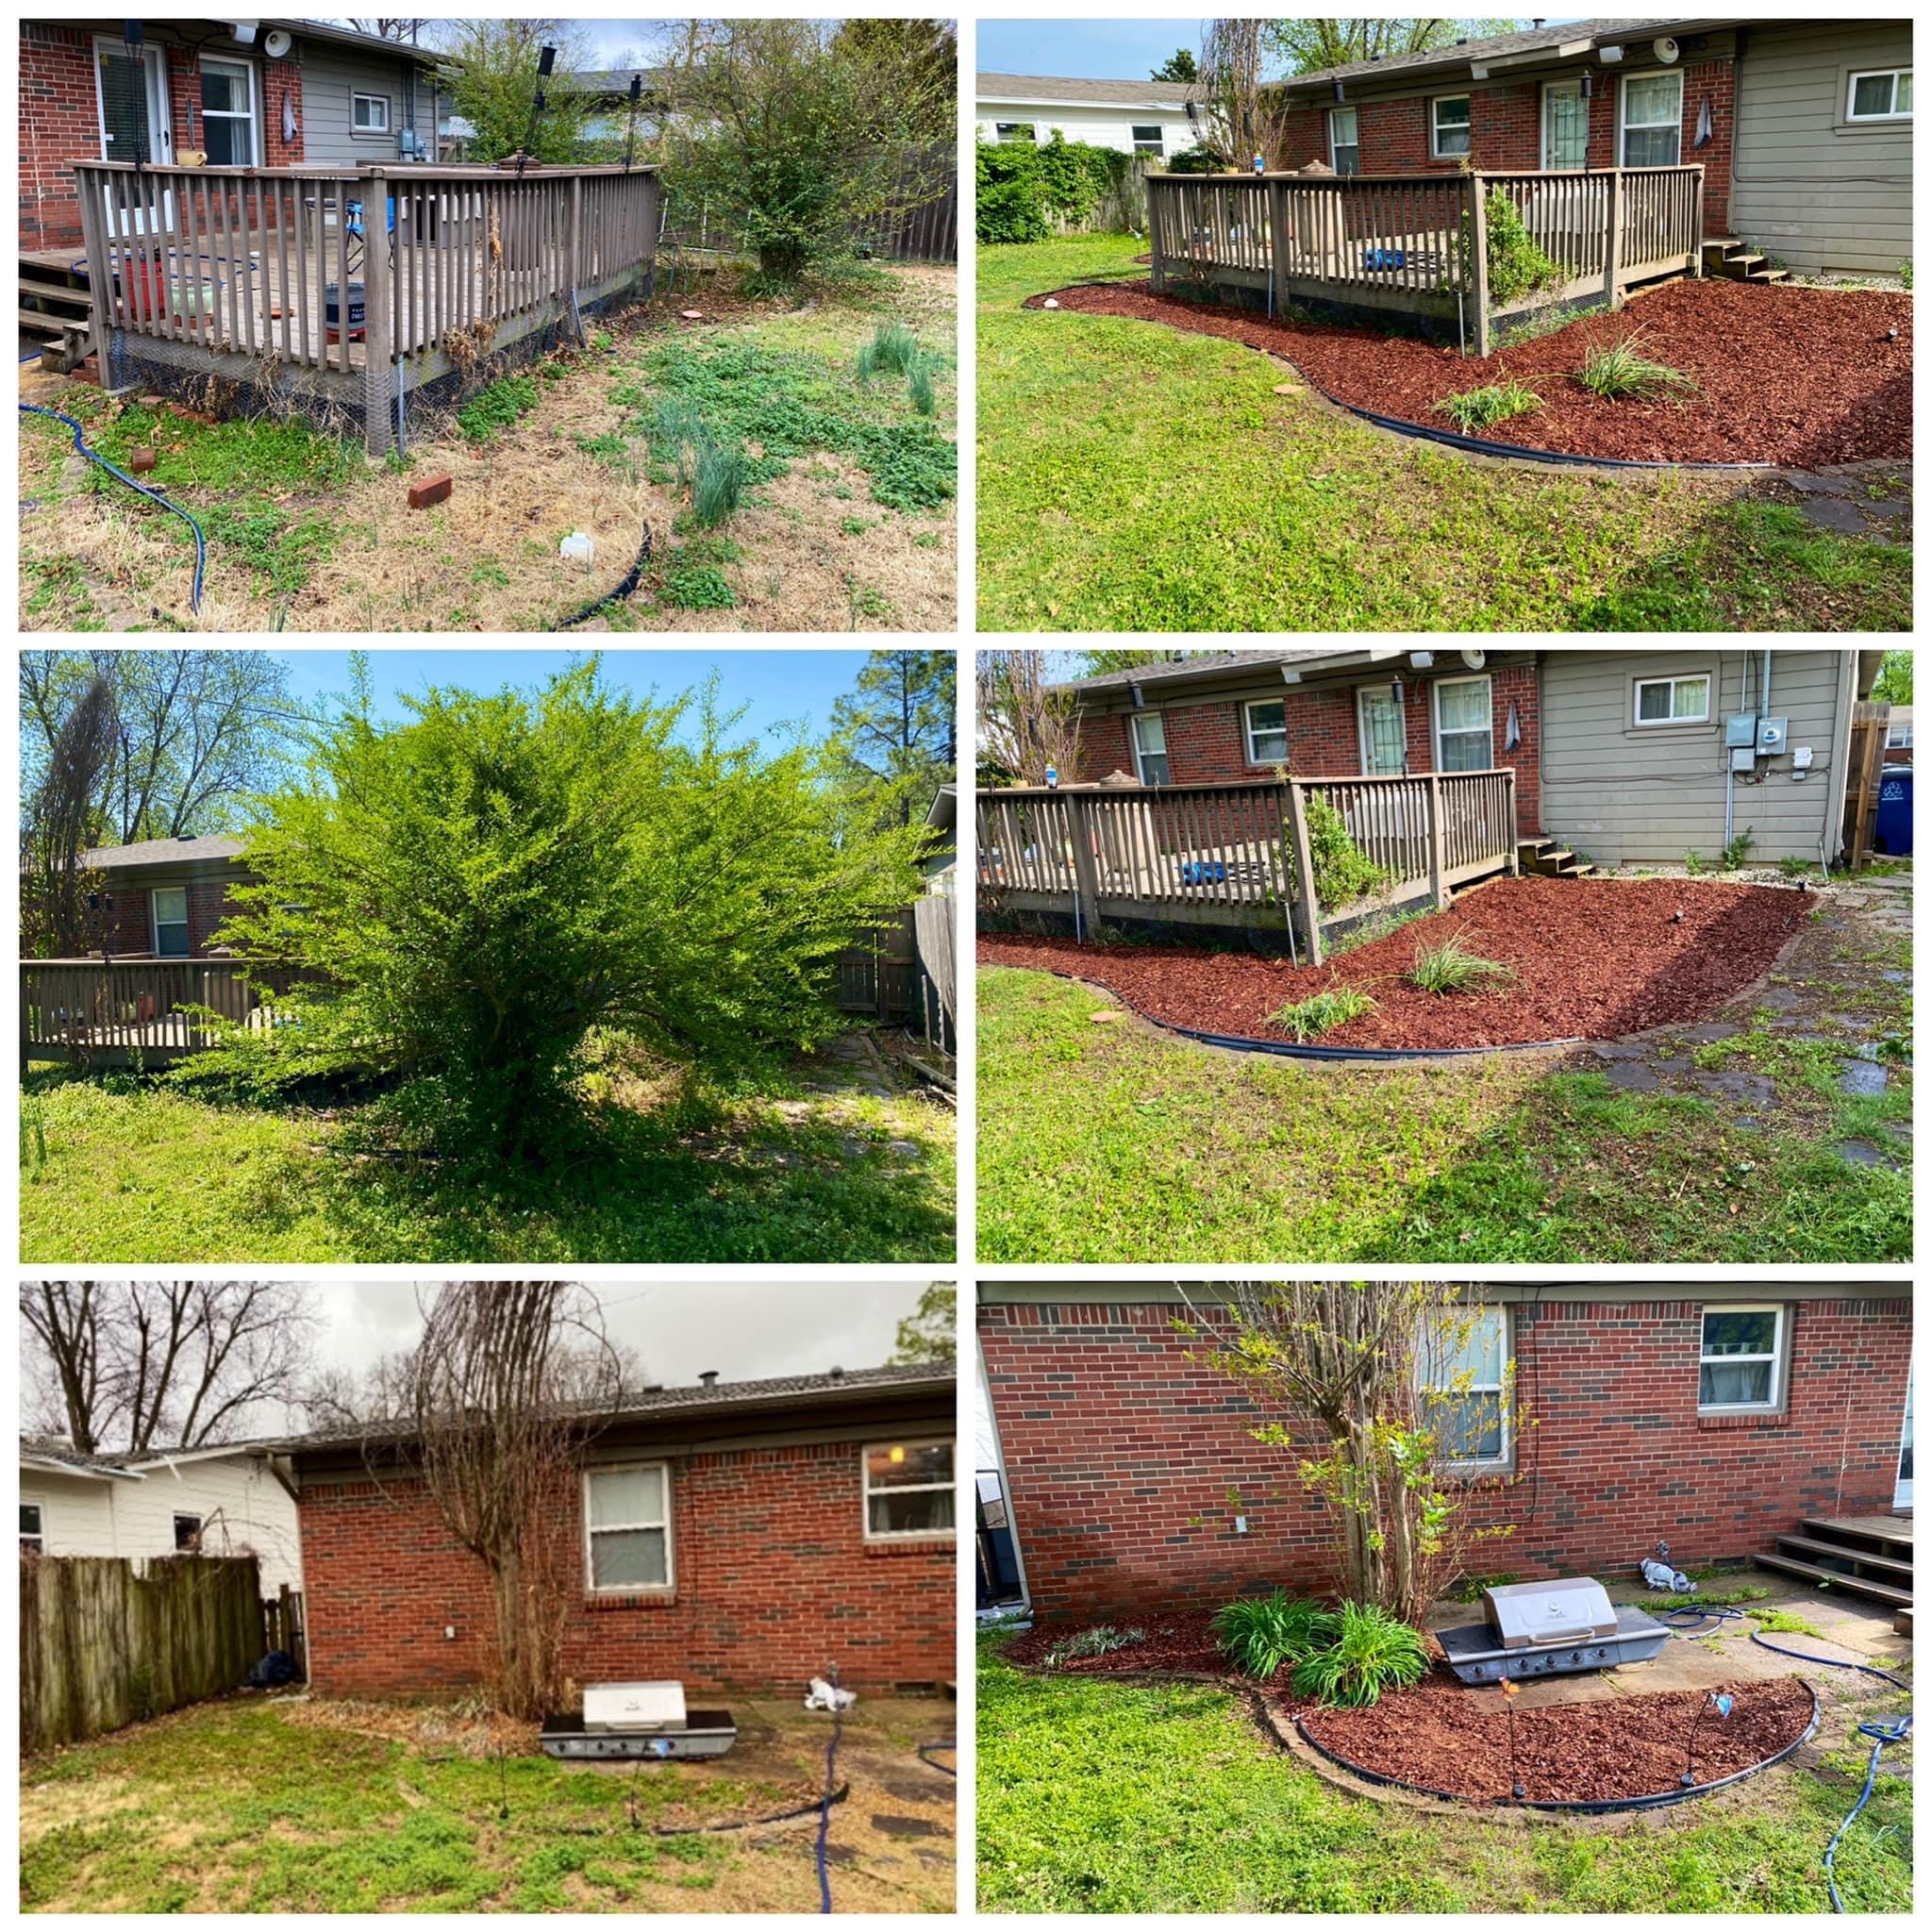 Tree Removal and Landscaping: Garden Landscape Design, Tree Removal, Mulch, Flower Bed Clean Out, Grass Removal